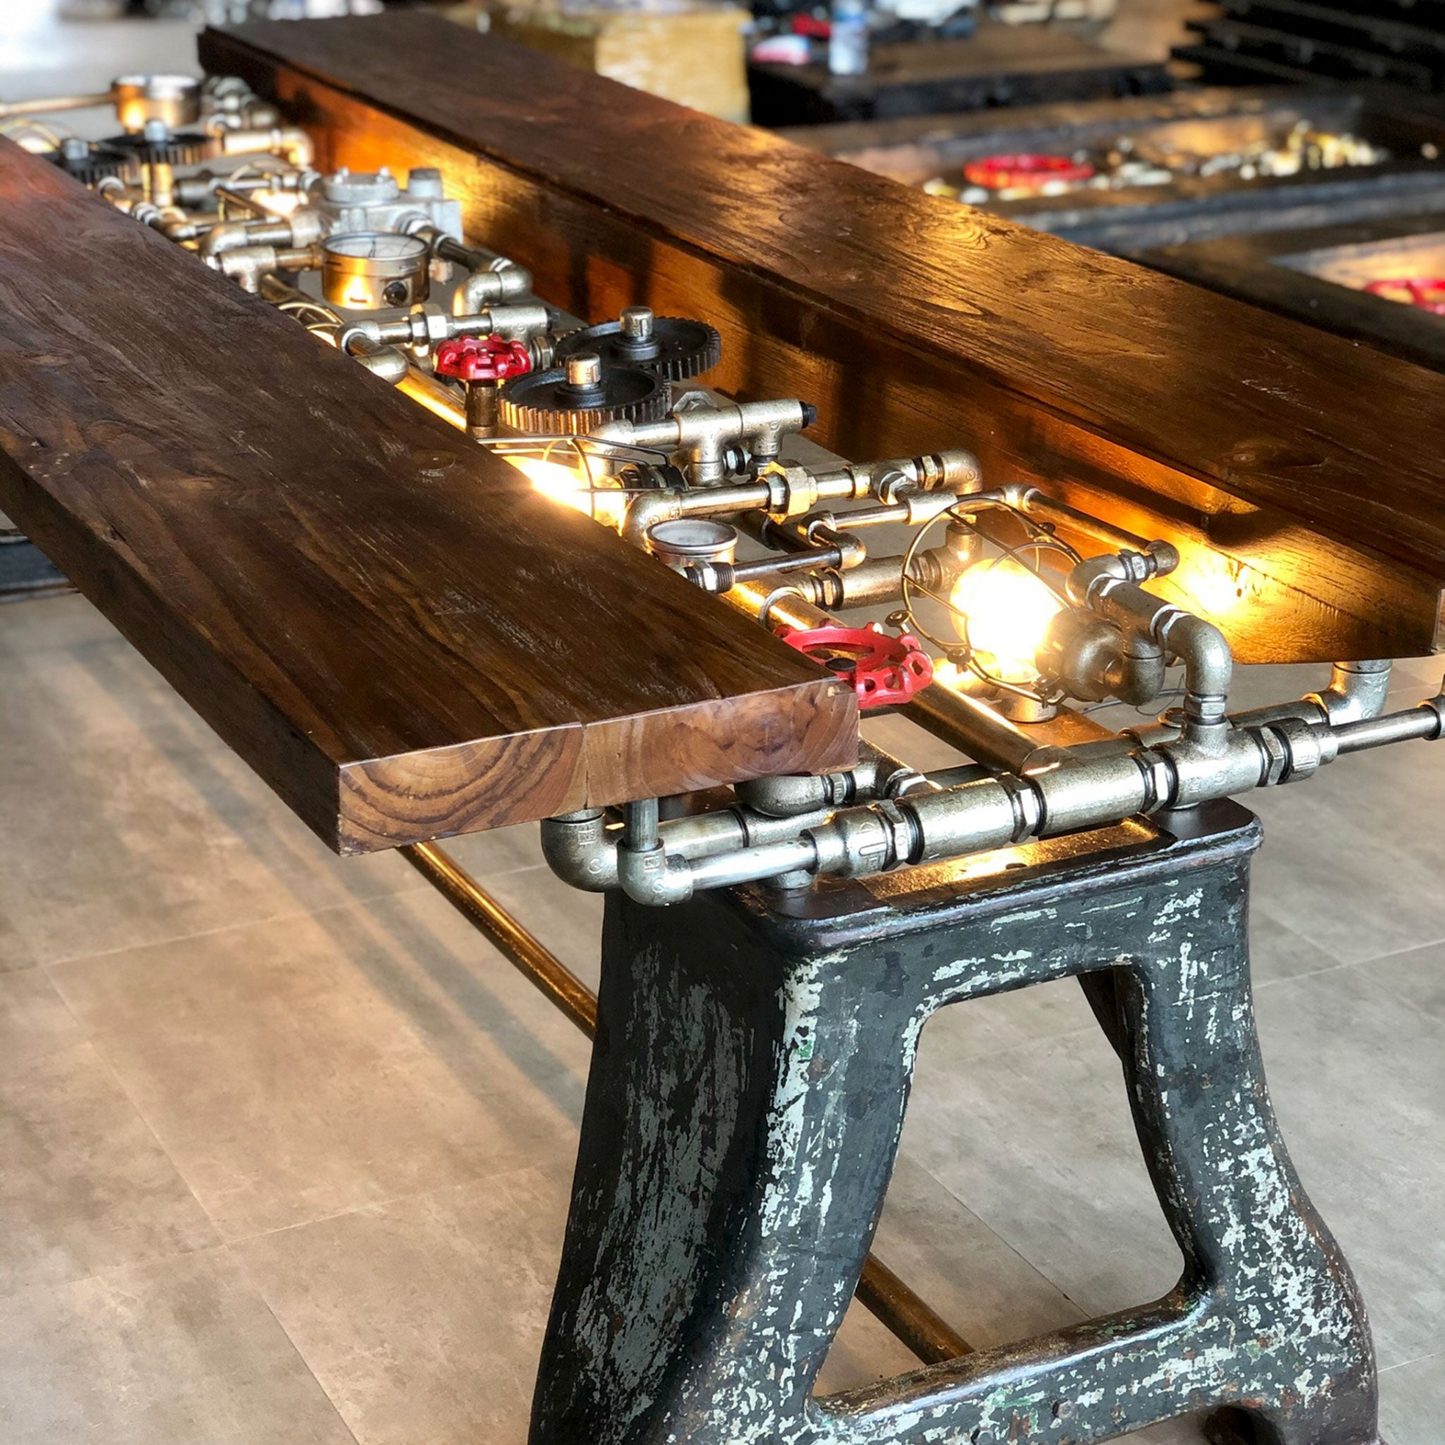 Unique Handmade Steam Punk Dining Table - Industrial Charm | Golden Pigs